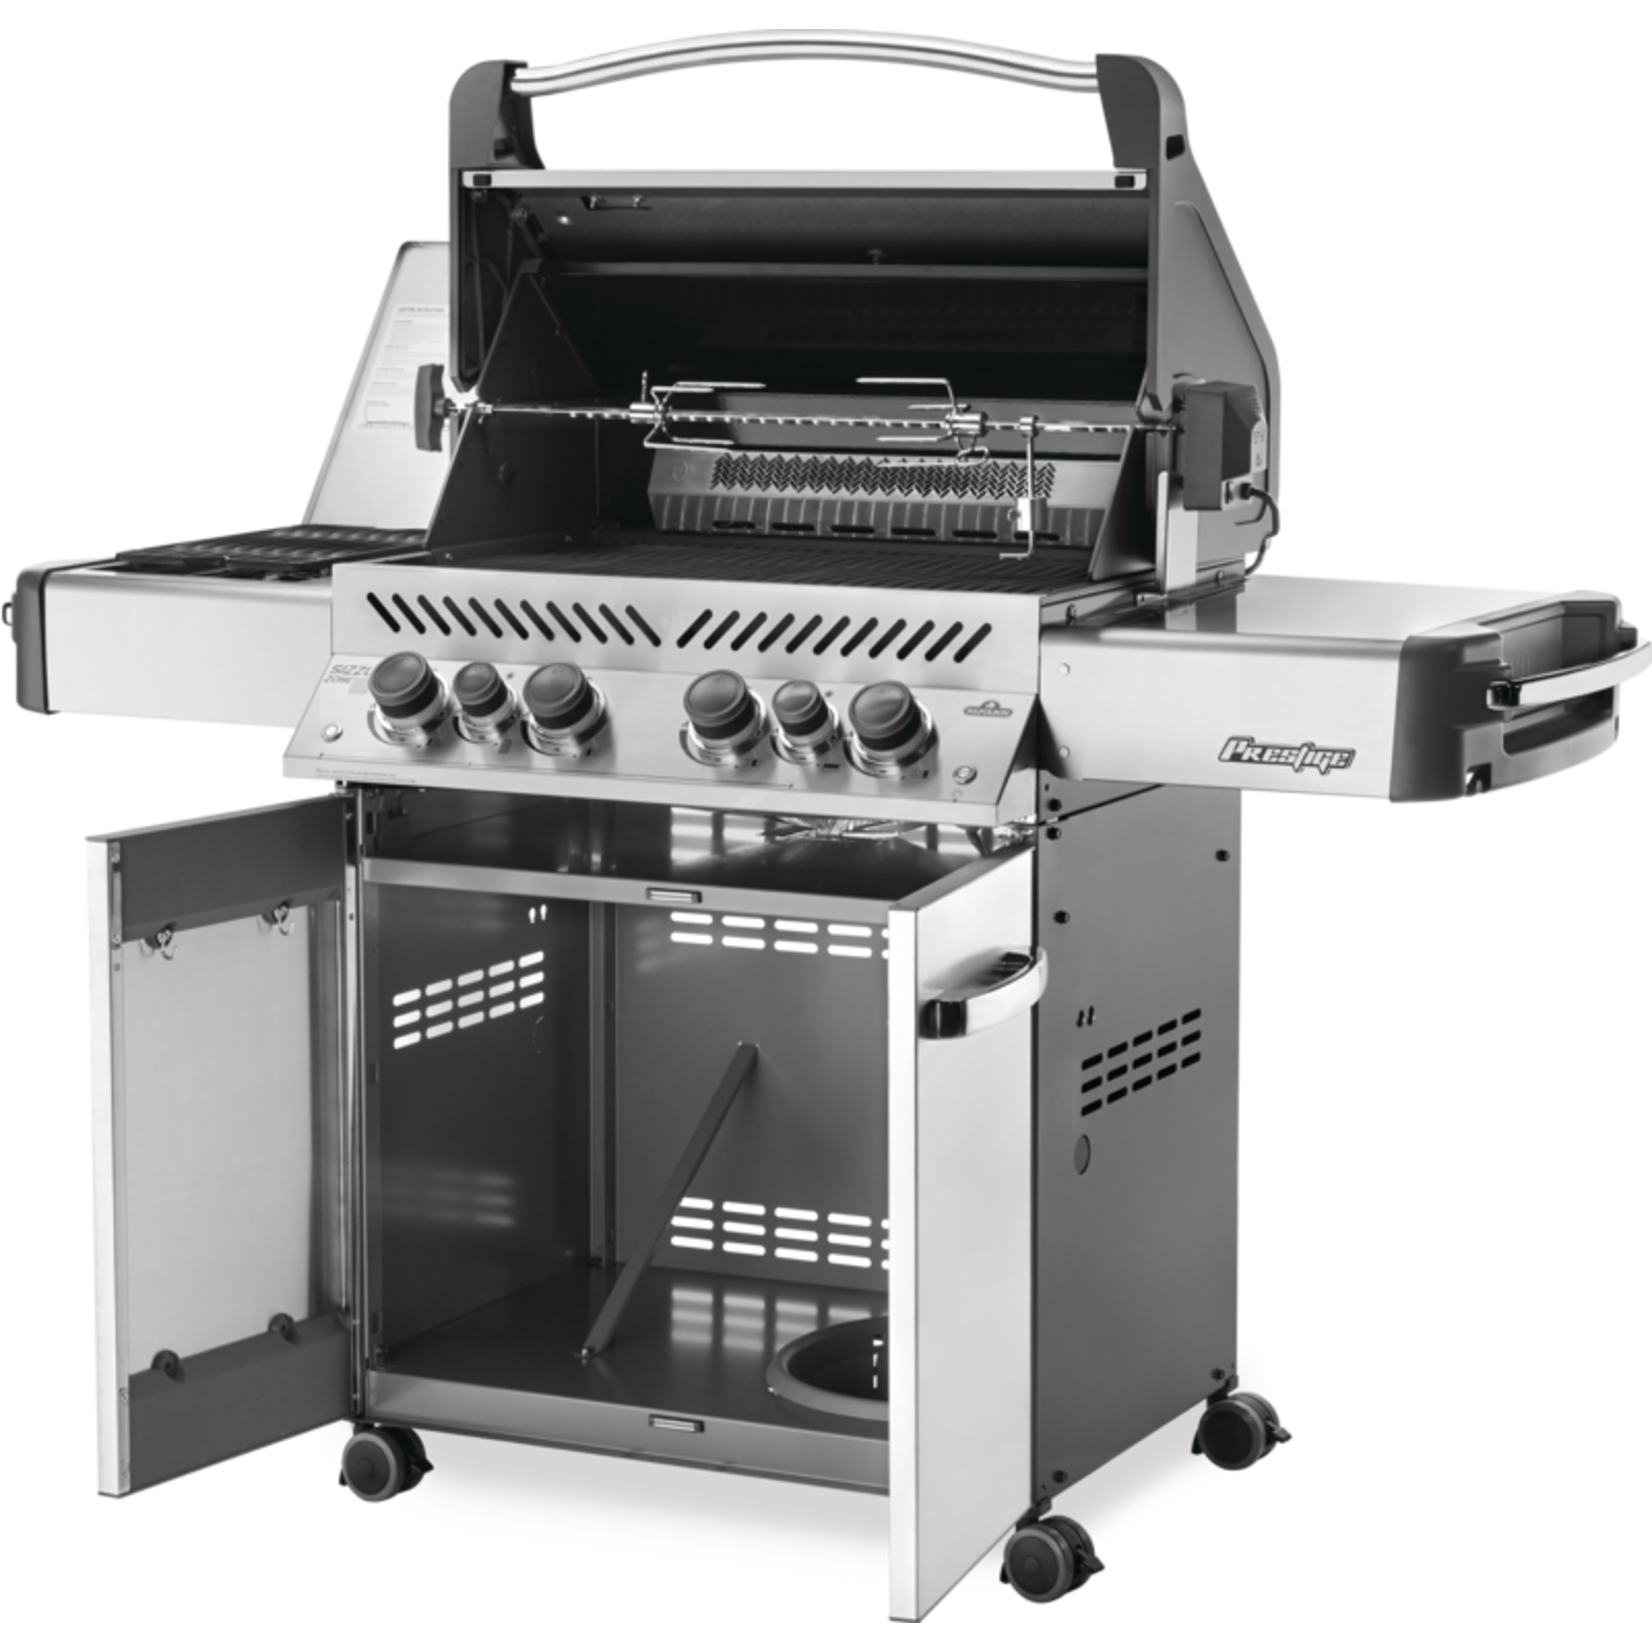 Napoleon Prestige® 500 Propane Gas Grill with Infrared Side and Rear Burners, Stainless Steel ($125 Instant Rebate)